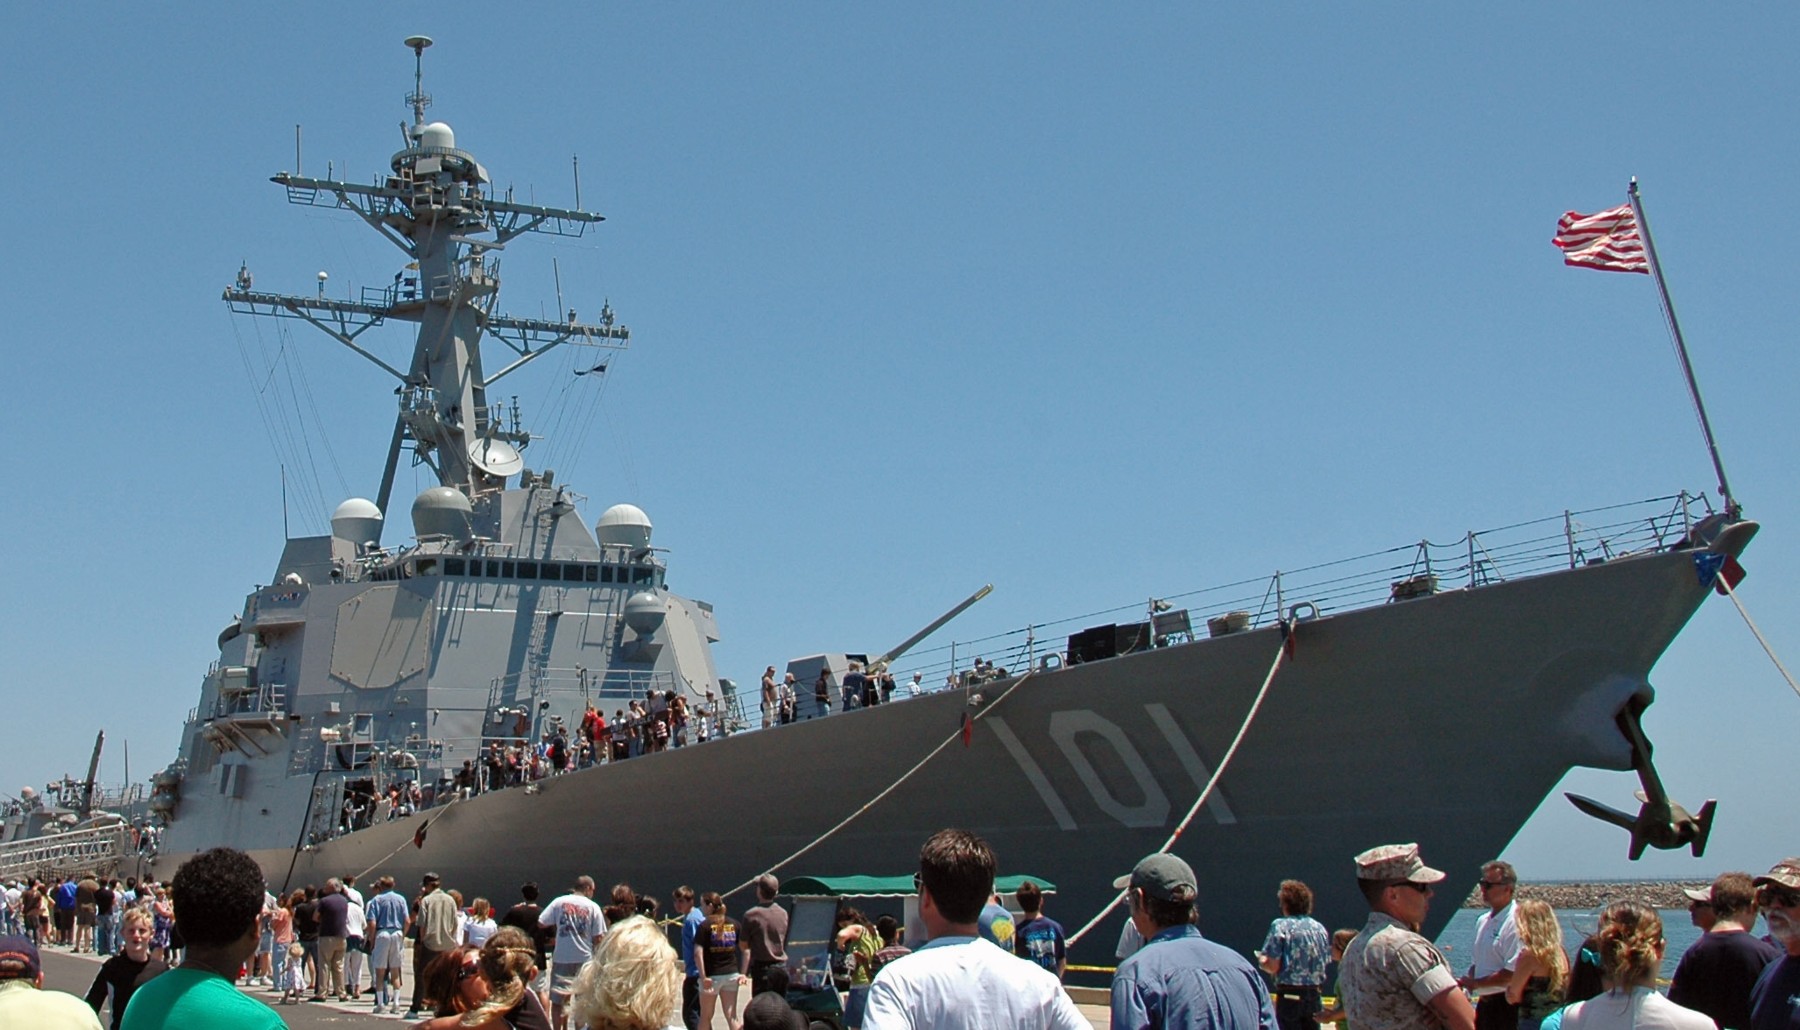 ddg-101 uss gridley arleigh burke class guided missile destroyer aegis us navy weapon station seal beach california 47